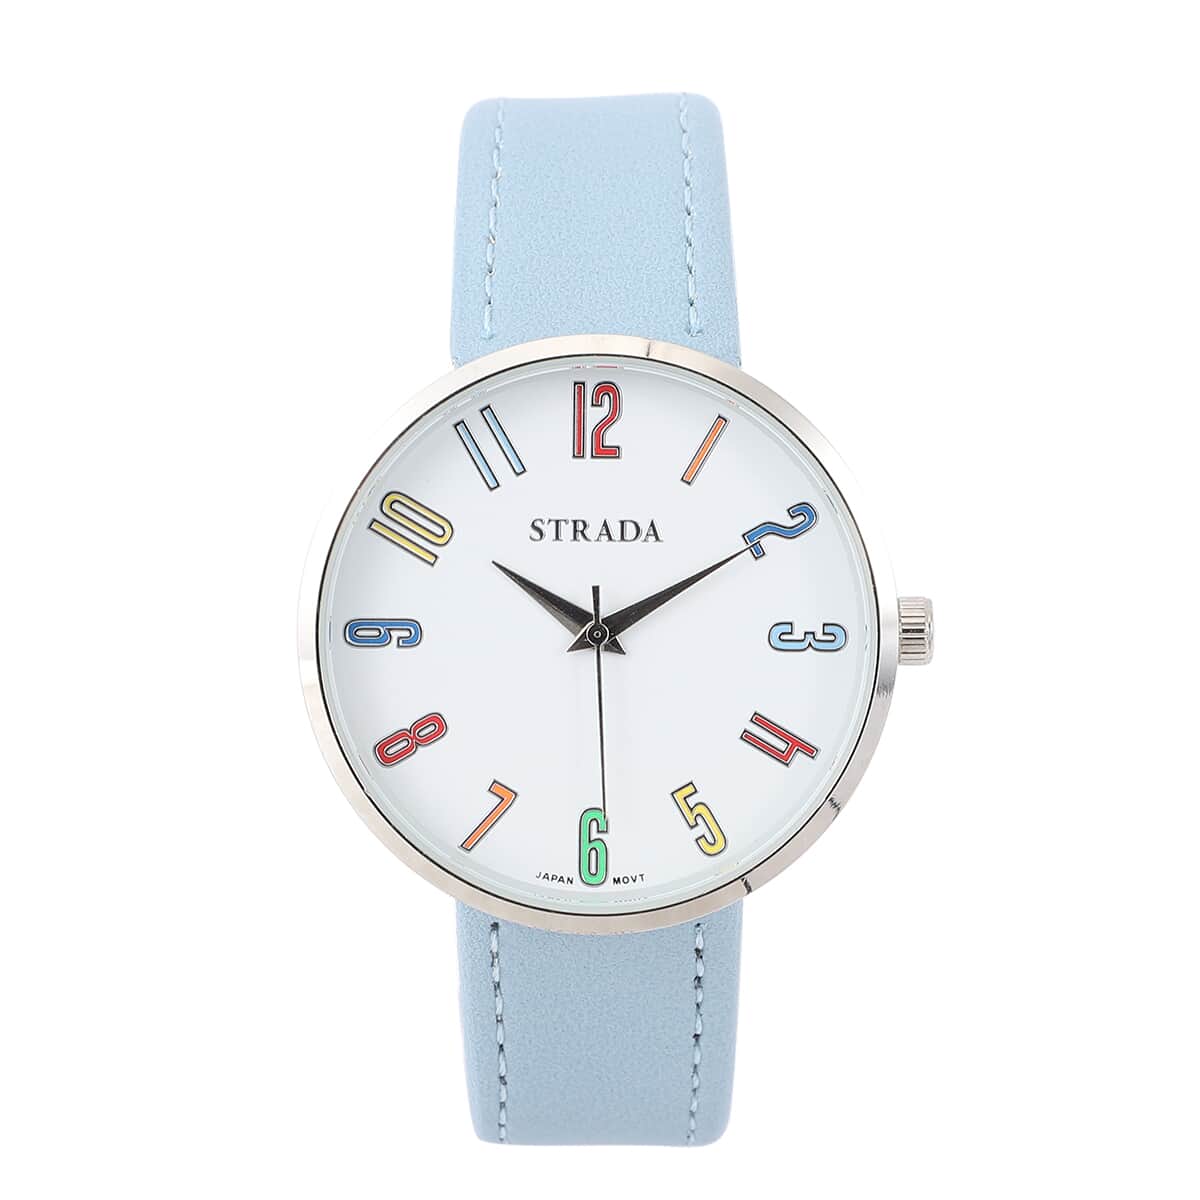 Strada Japanese Movement Water Resistant Watch with Blue Faux Leather Band image number 0